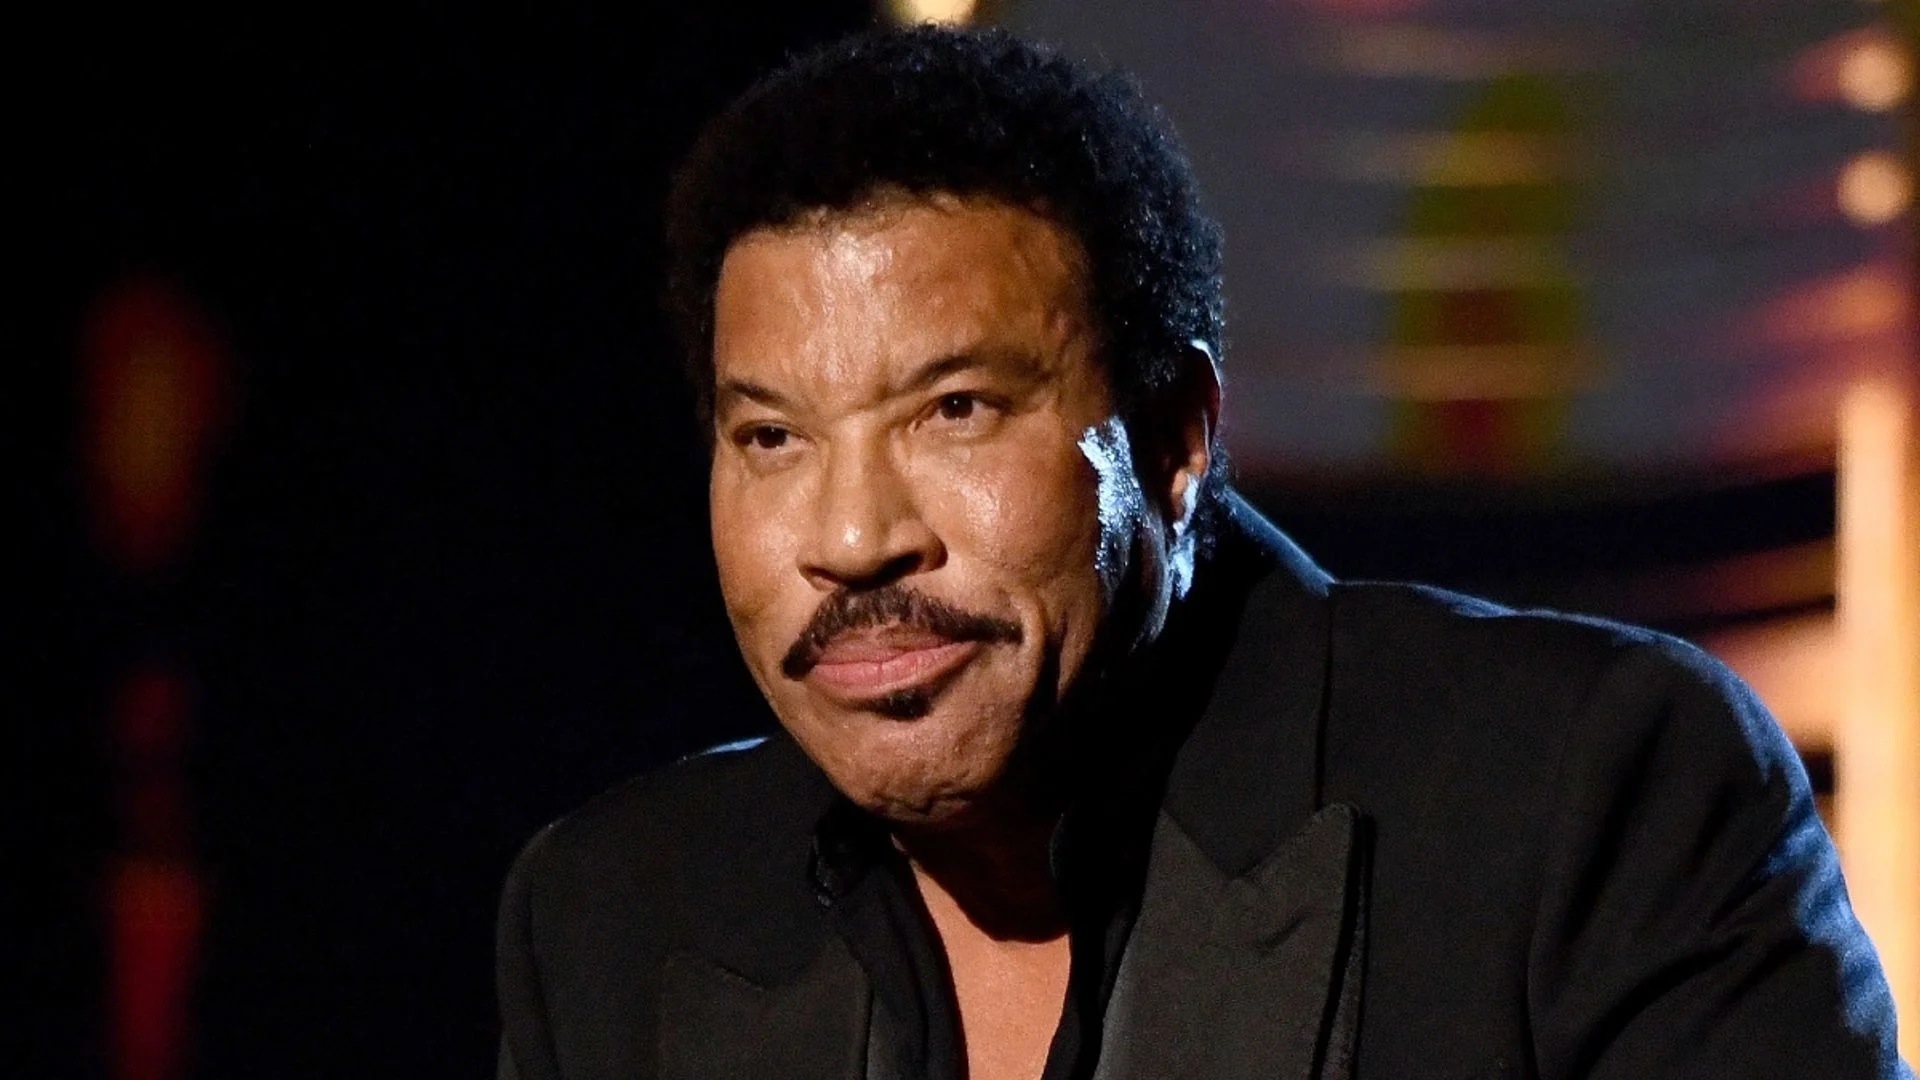 Lionel Richie Premieres ‘We Are The World’ Documentary And Duet With Jon Batiste